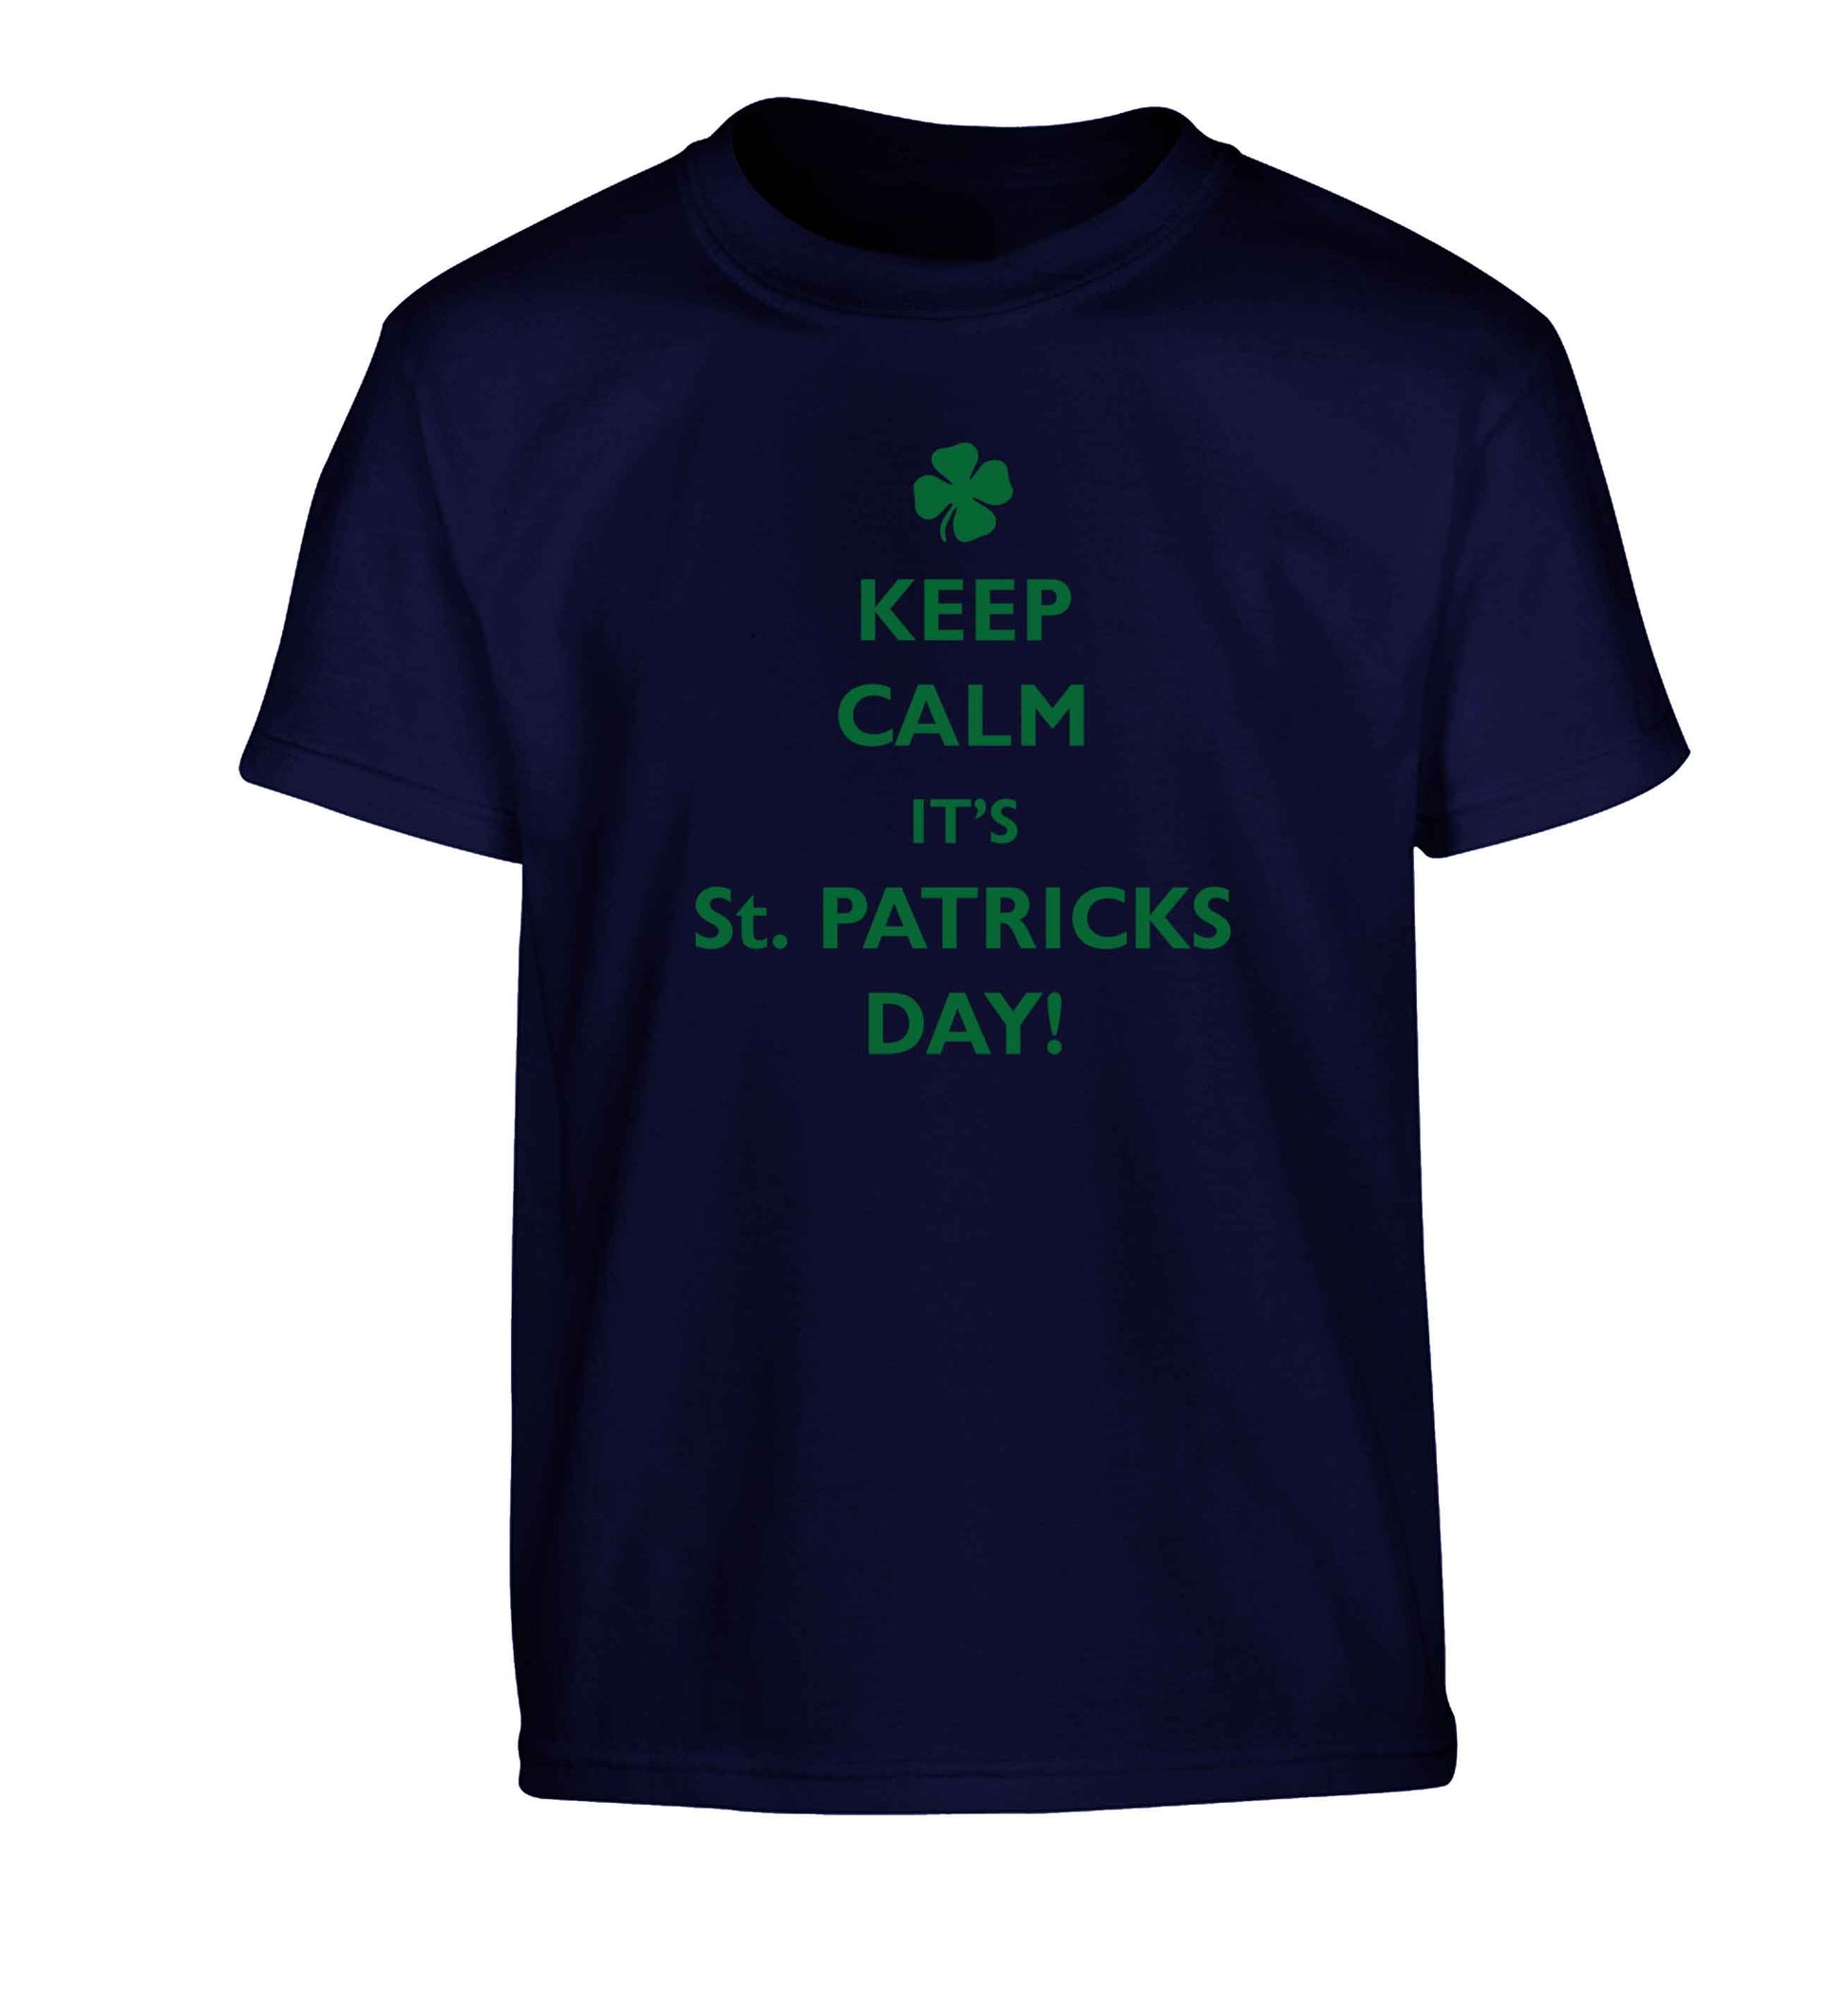 I can't keep calm it's St.Patricks day Children's navy Tshirt 12-13 Years